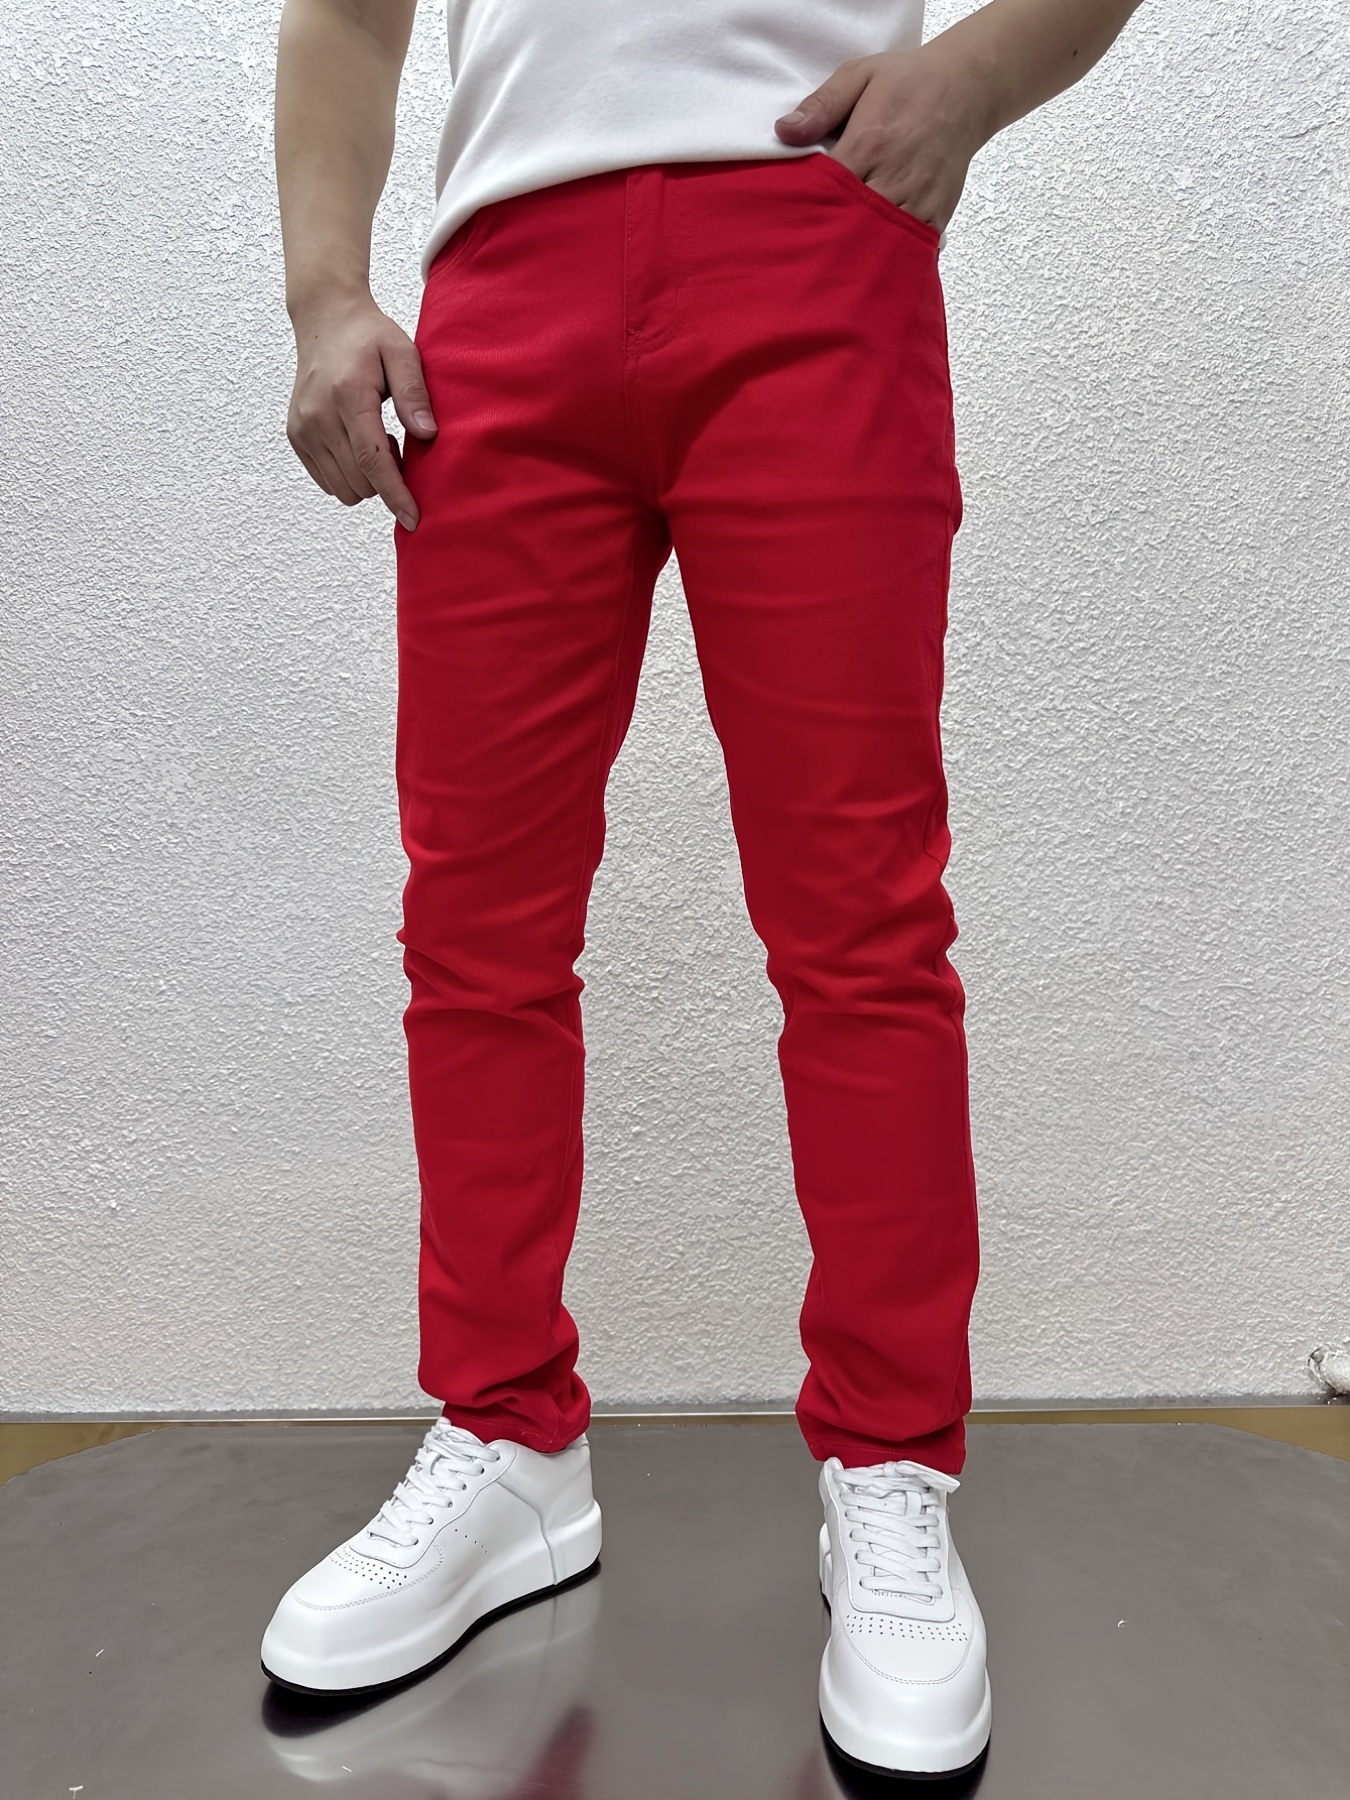 New Red Jeans Mens Slim Elastic Pants For Spring And Autumn, Discounts For  Everyone